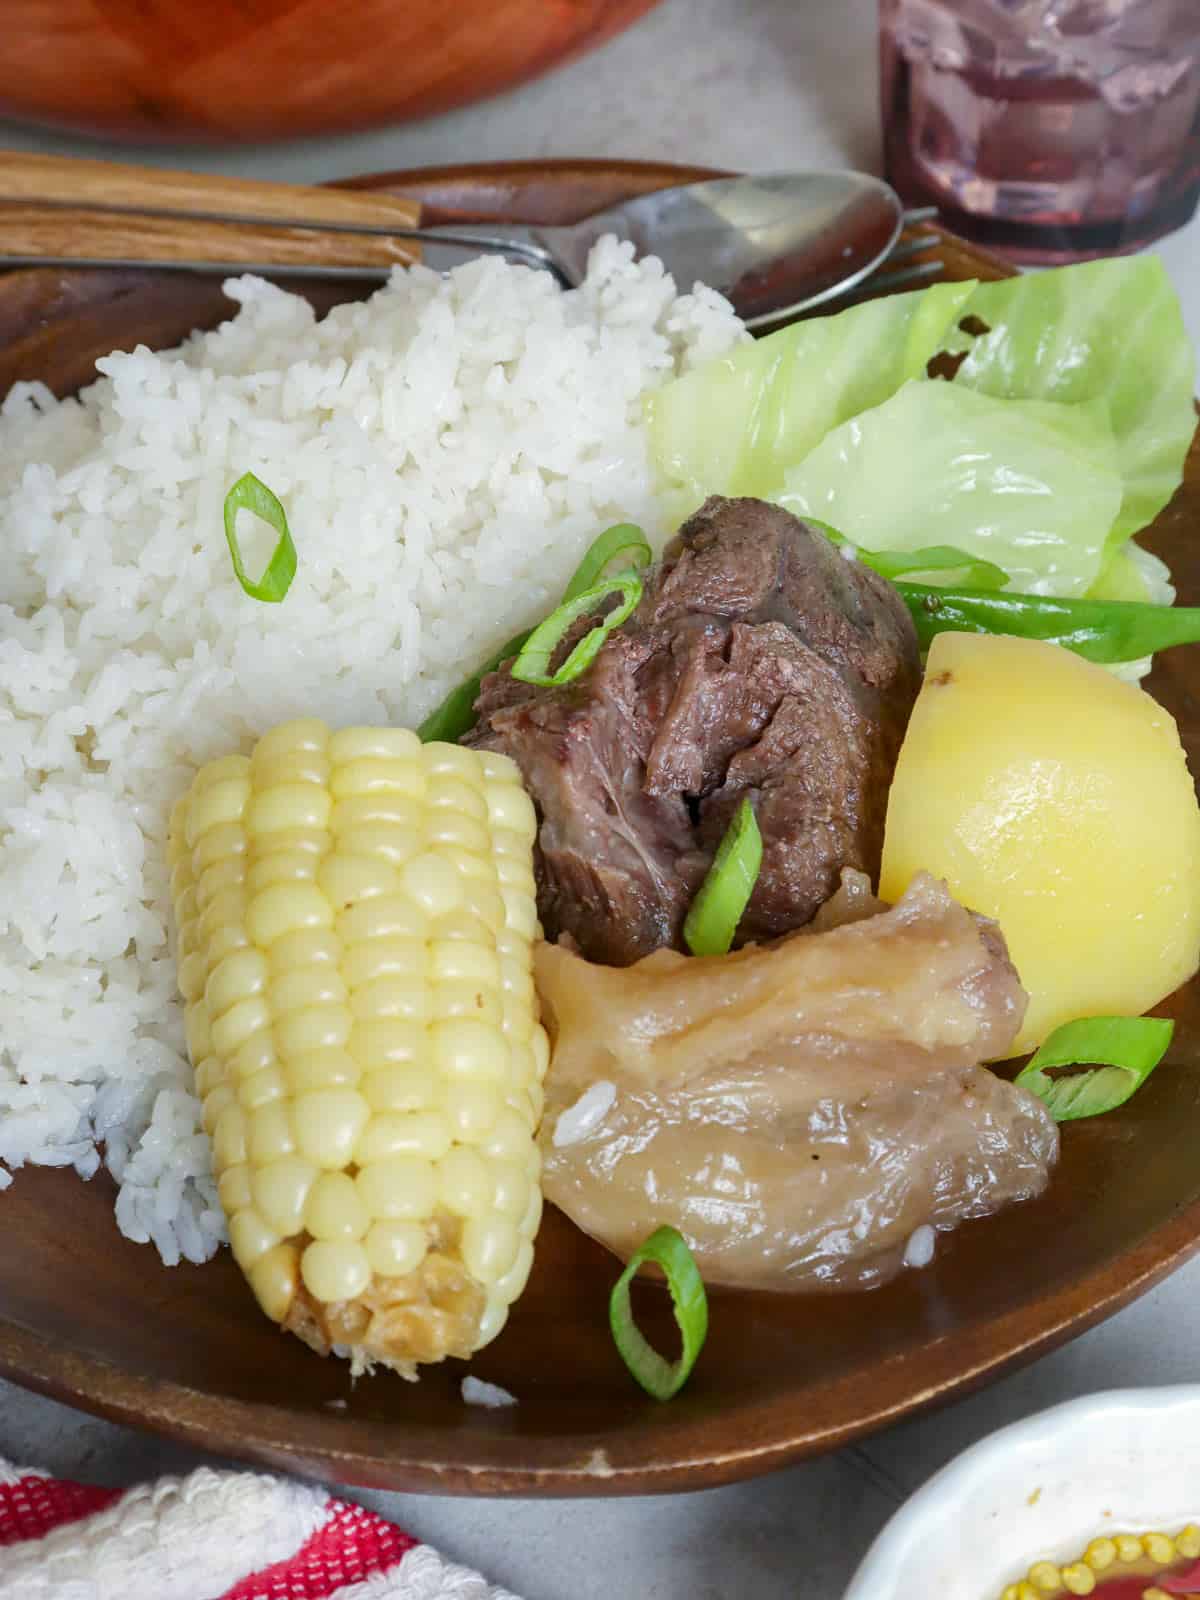 nilagang baka over white steamed rice on a plate